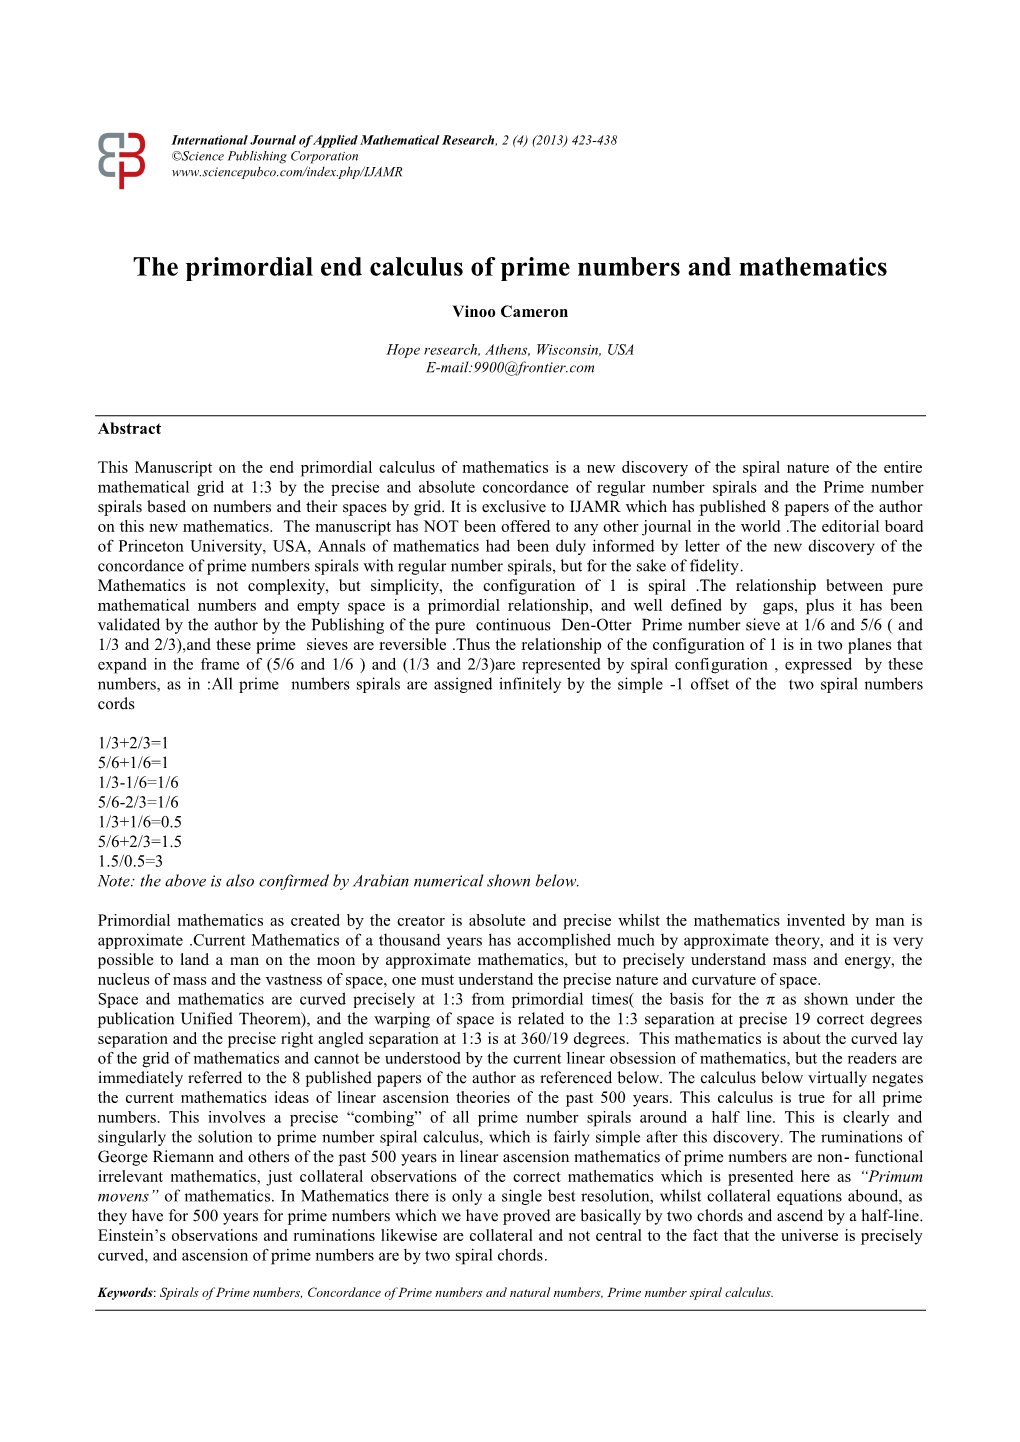 The Primordial End Calculus of Prime Numbers and Mathematics